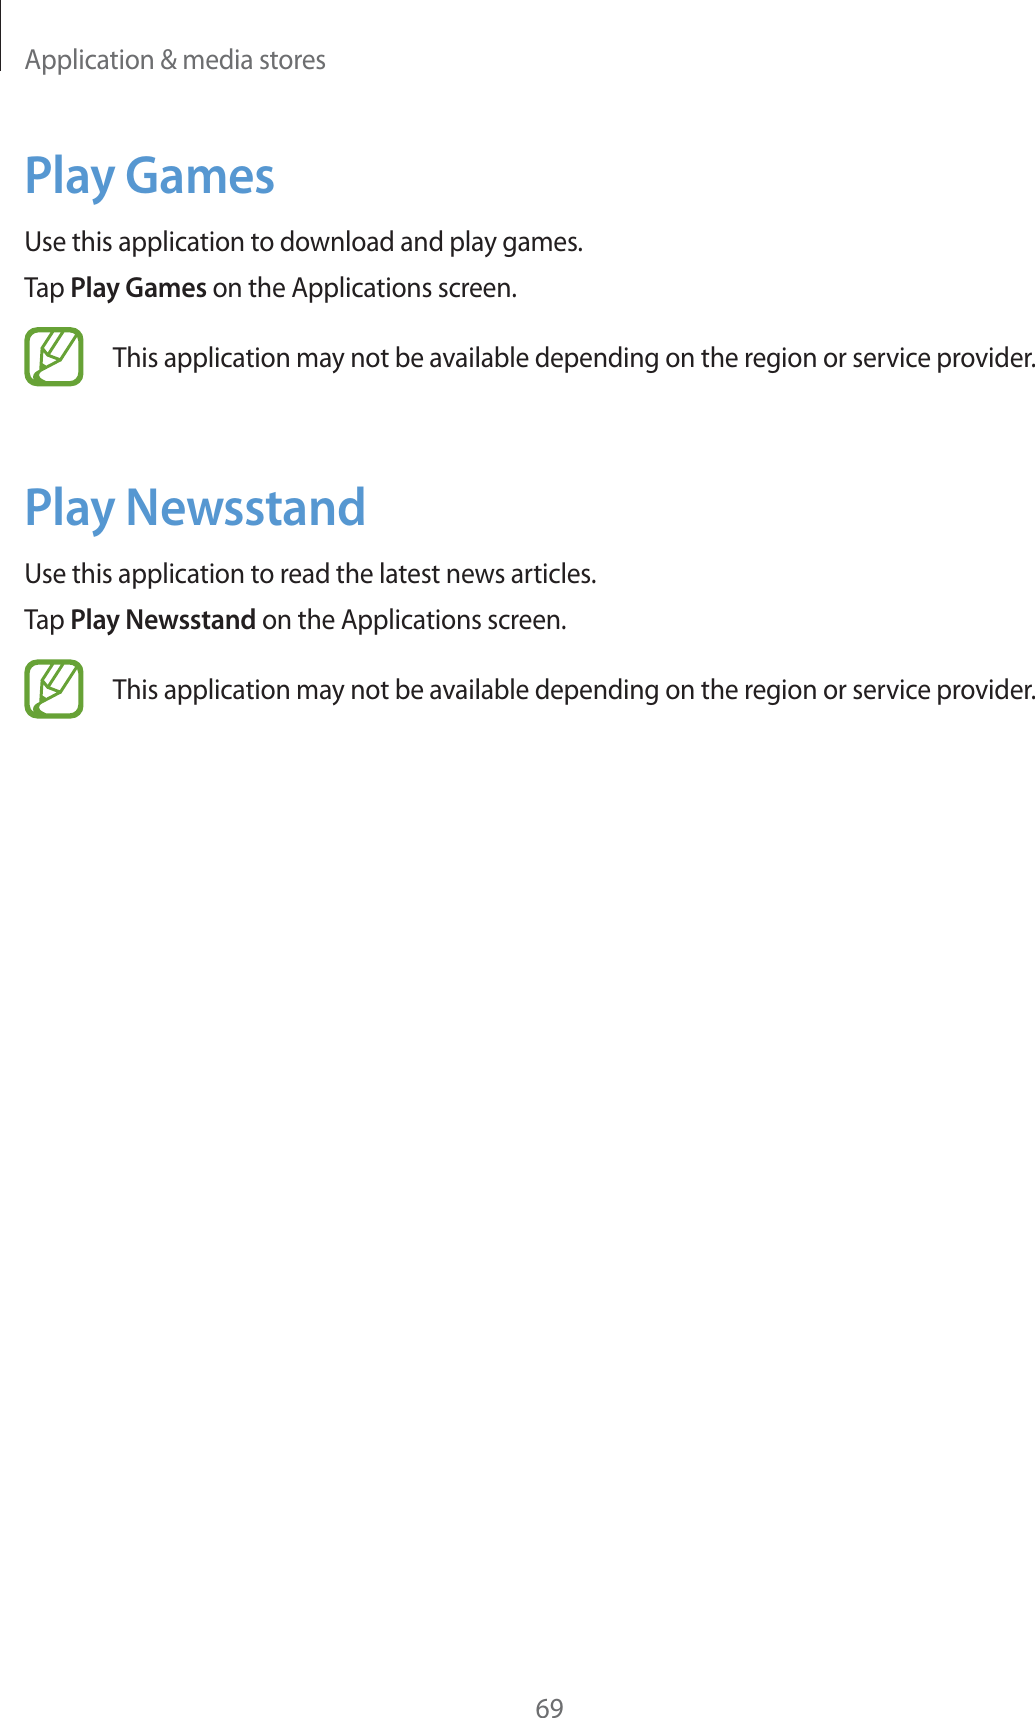 Application &amp; media stores69Play GamesUse this application to download and play games.Tap Play Games on the Applications screen.This application may not be available depending on the region or service provider.Play NewsstandUse this application to read the latest news articles.Tap Play Newsstand on the Applications screen.This application may not be available depending on the region or service provider.